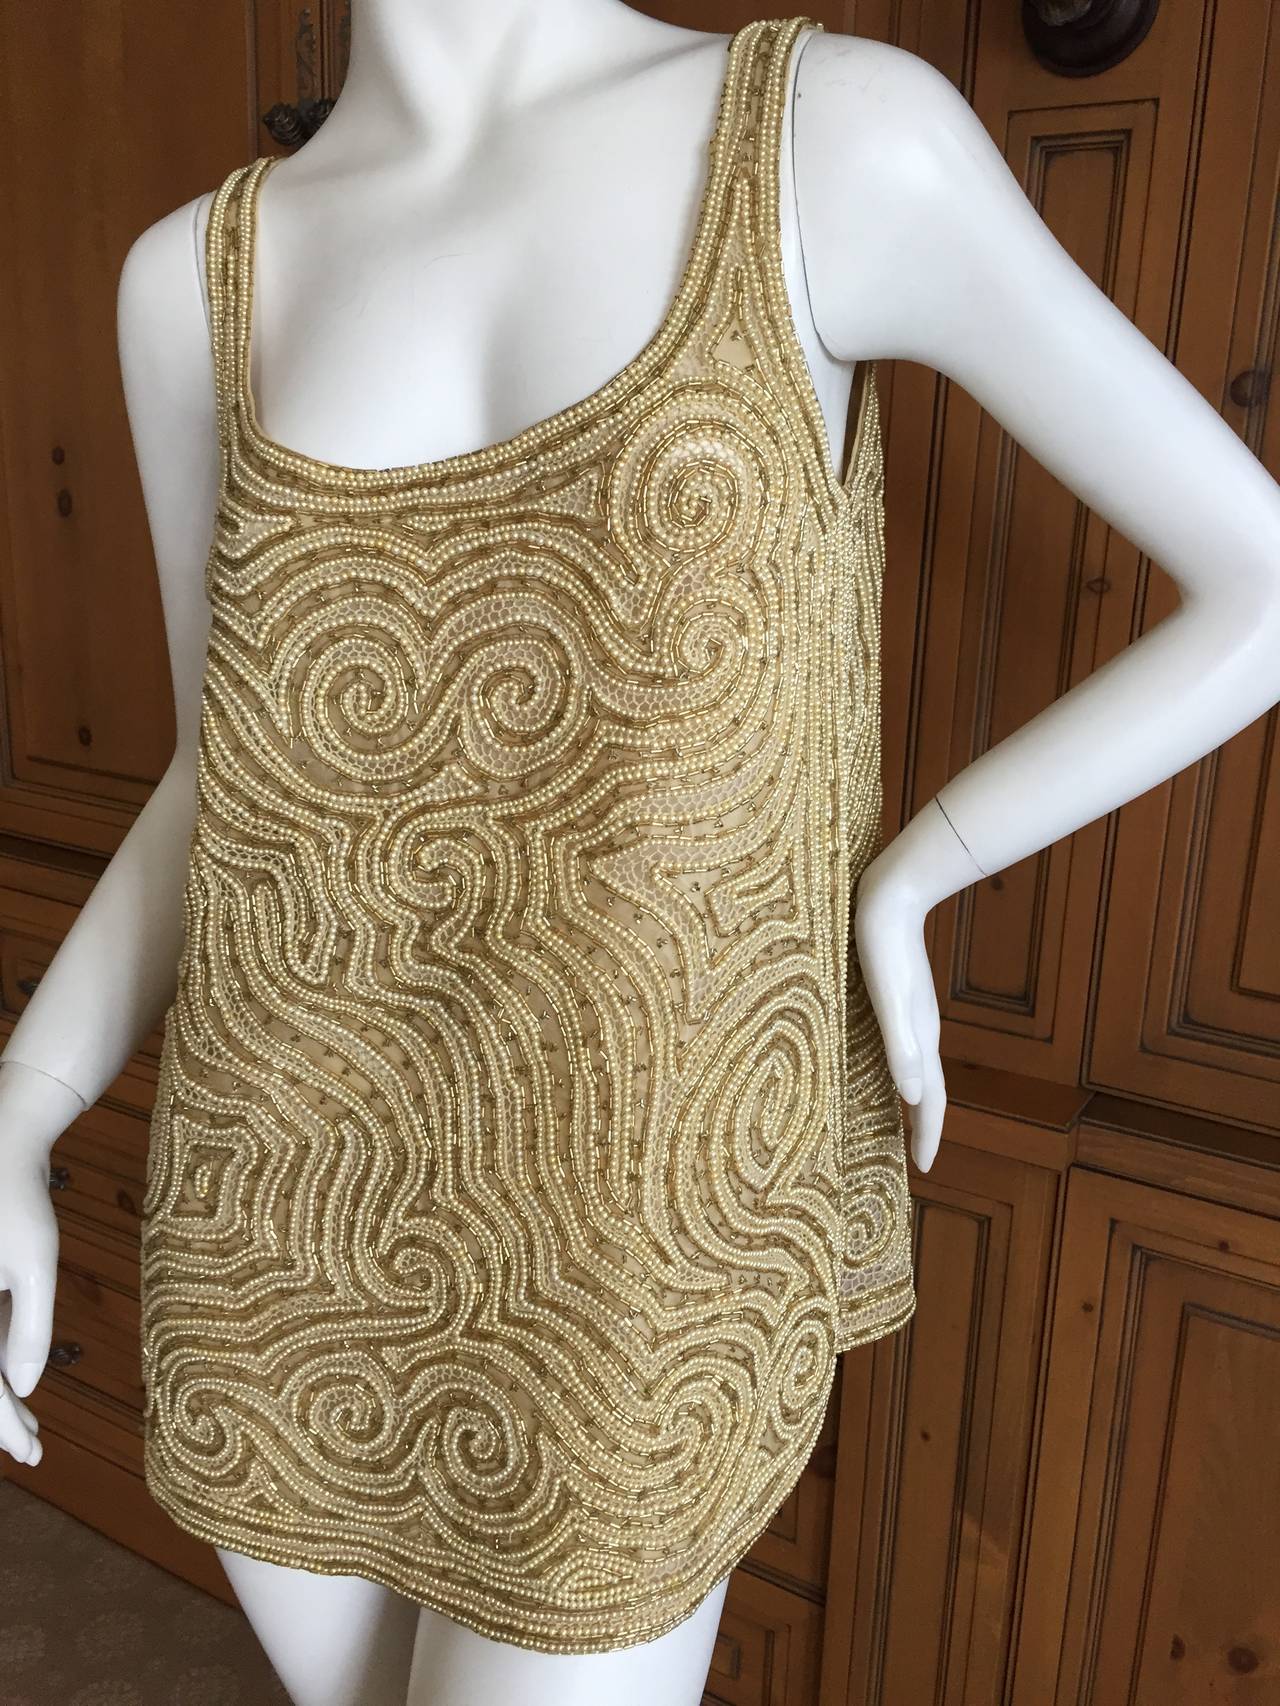 Halston 1970's Golden Pearl Embellished Top
This is so gorgeous, the photos don't quite capture the charm.
Heavily embellished with gold beads and tiny pearls.
From Amen Wardy  Newport Beach California, one of the most fashion forward stores of